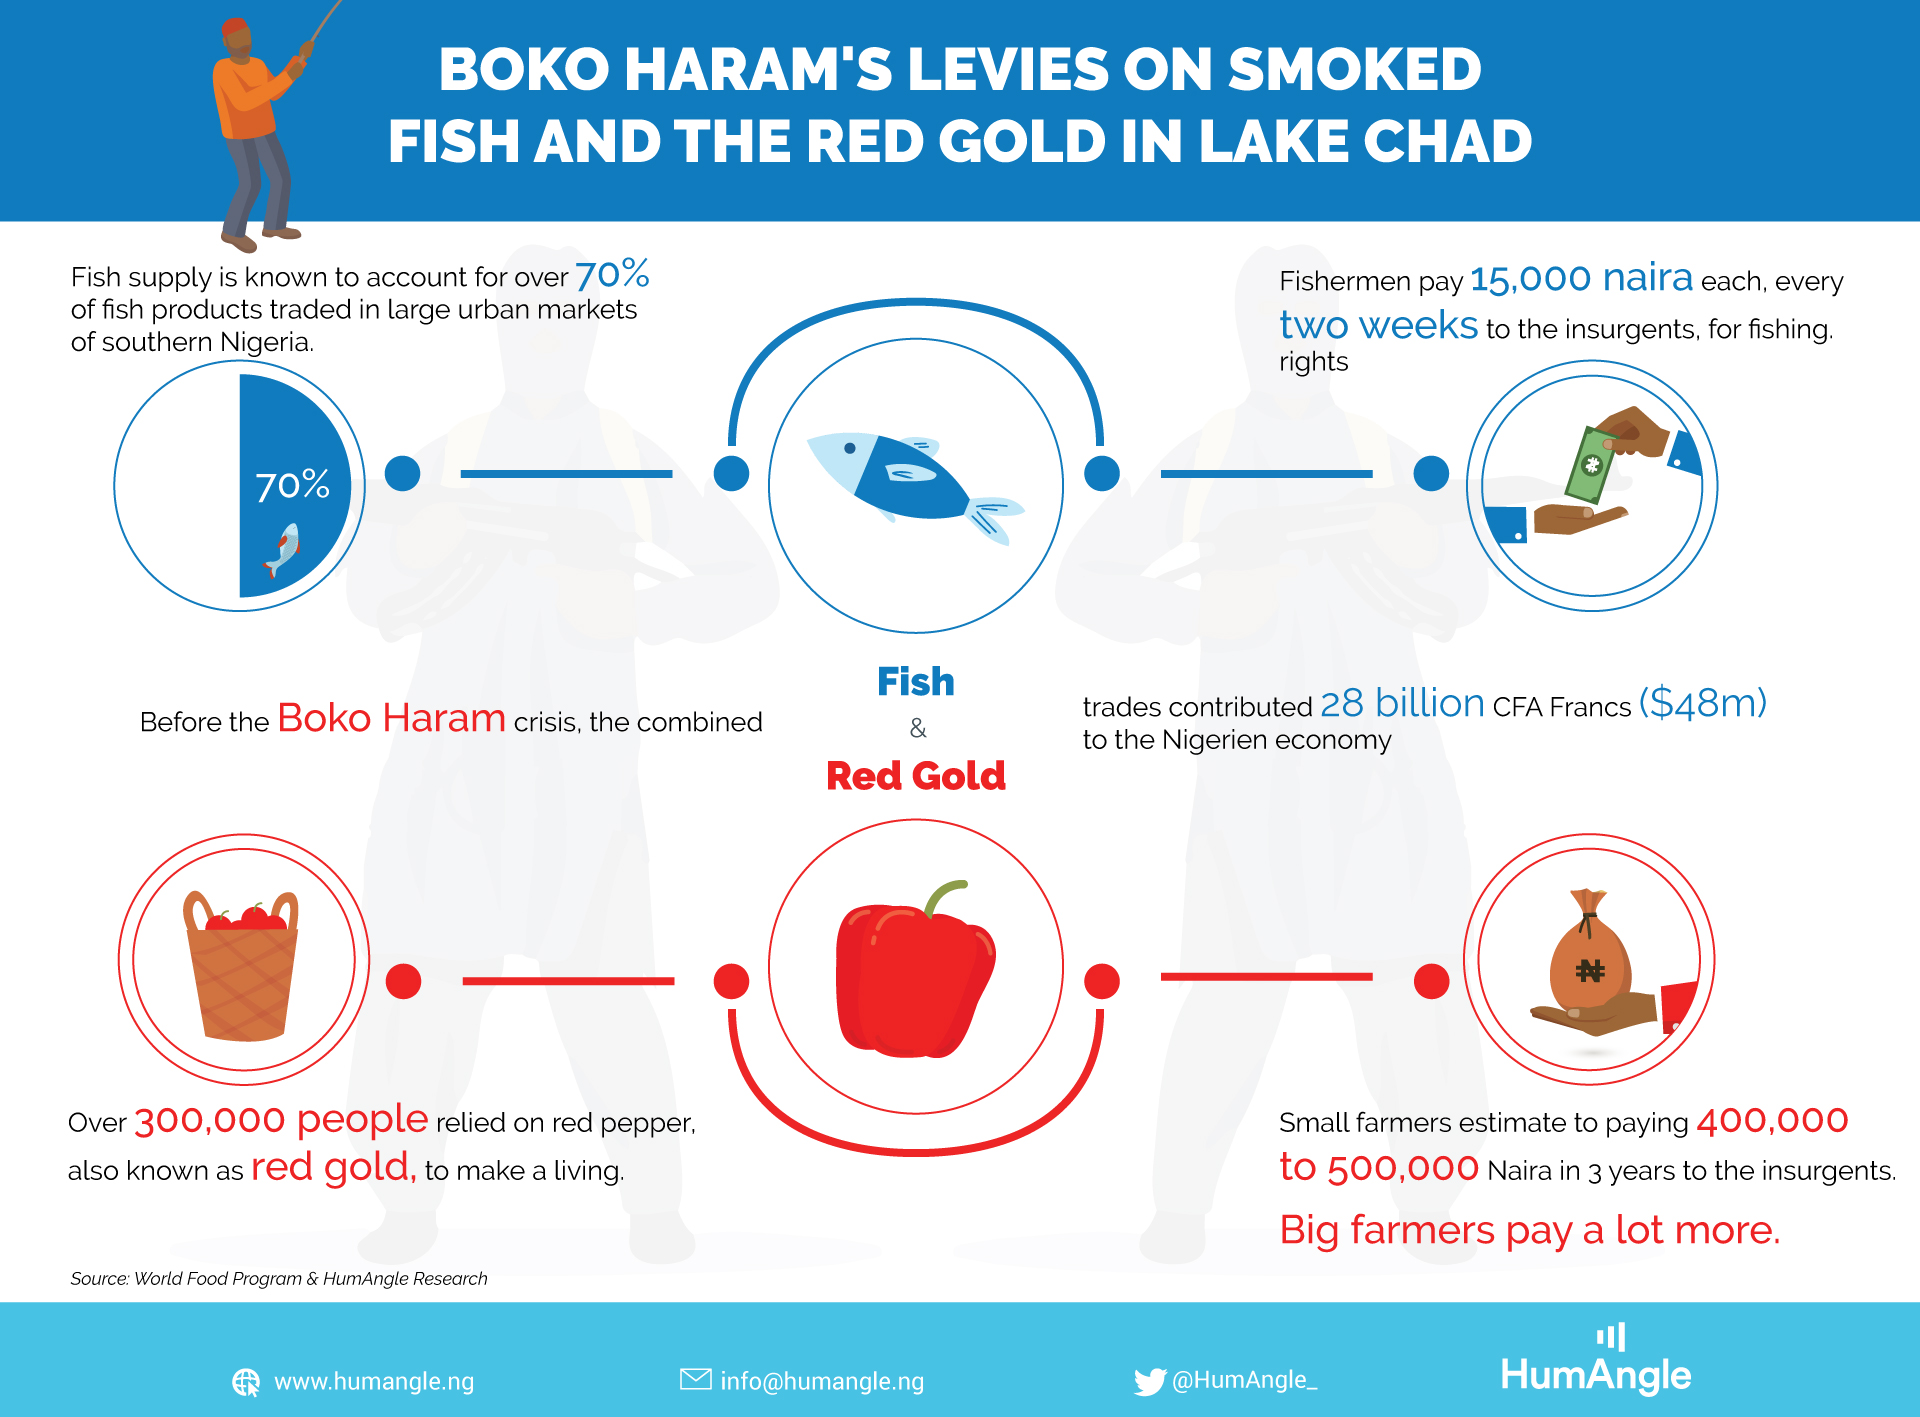 Boko Haram's levies on smoked fish and the red gold in Lake Chad